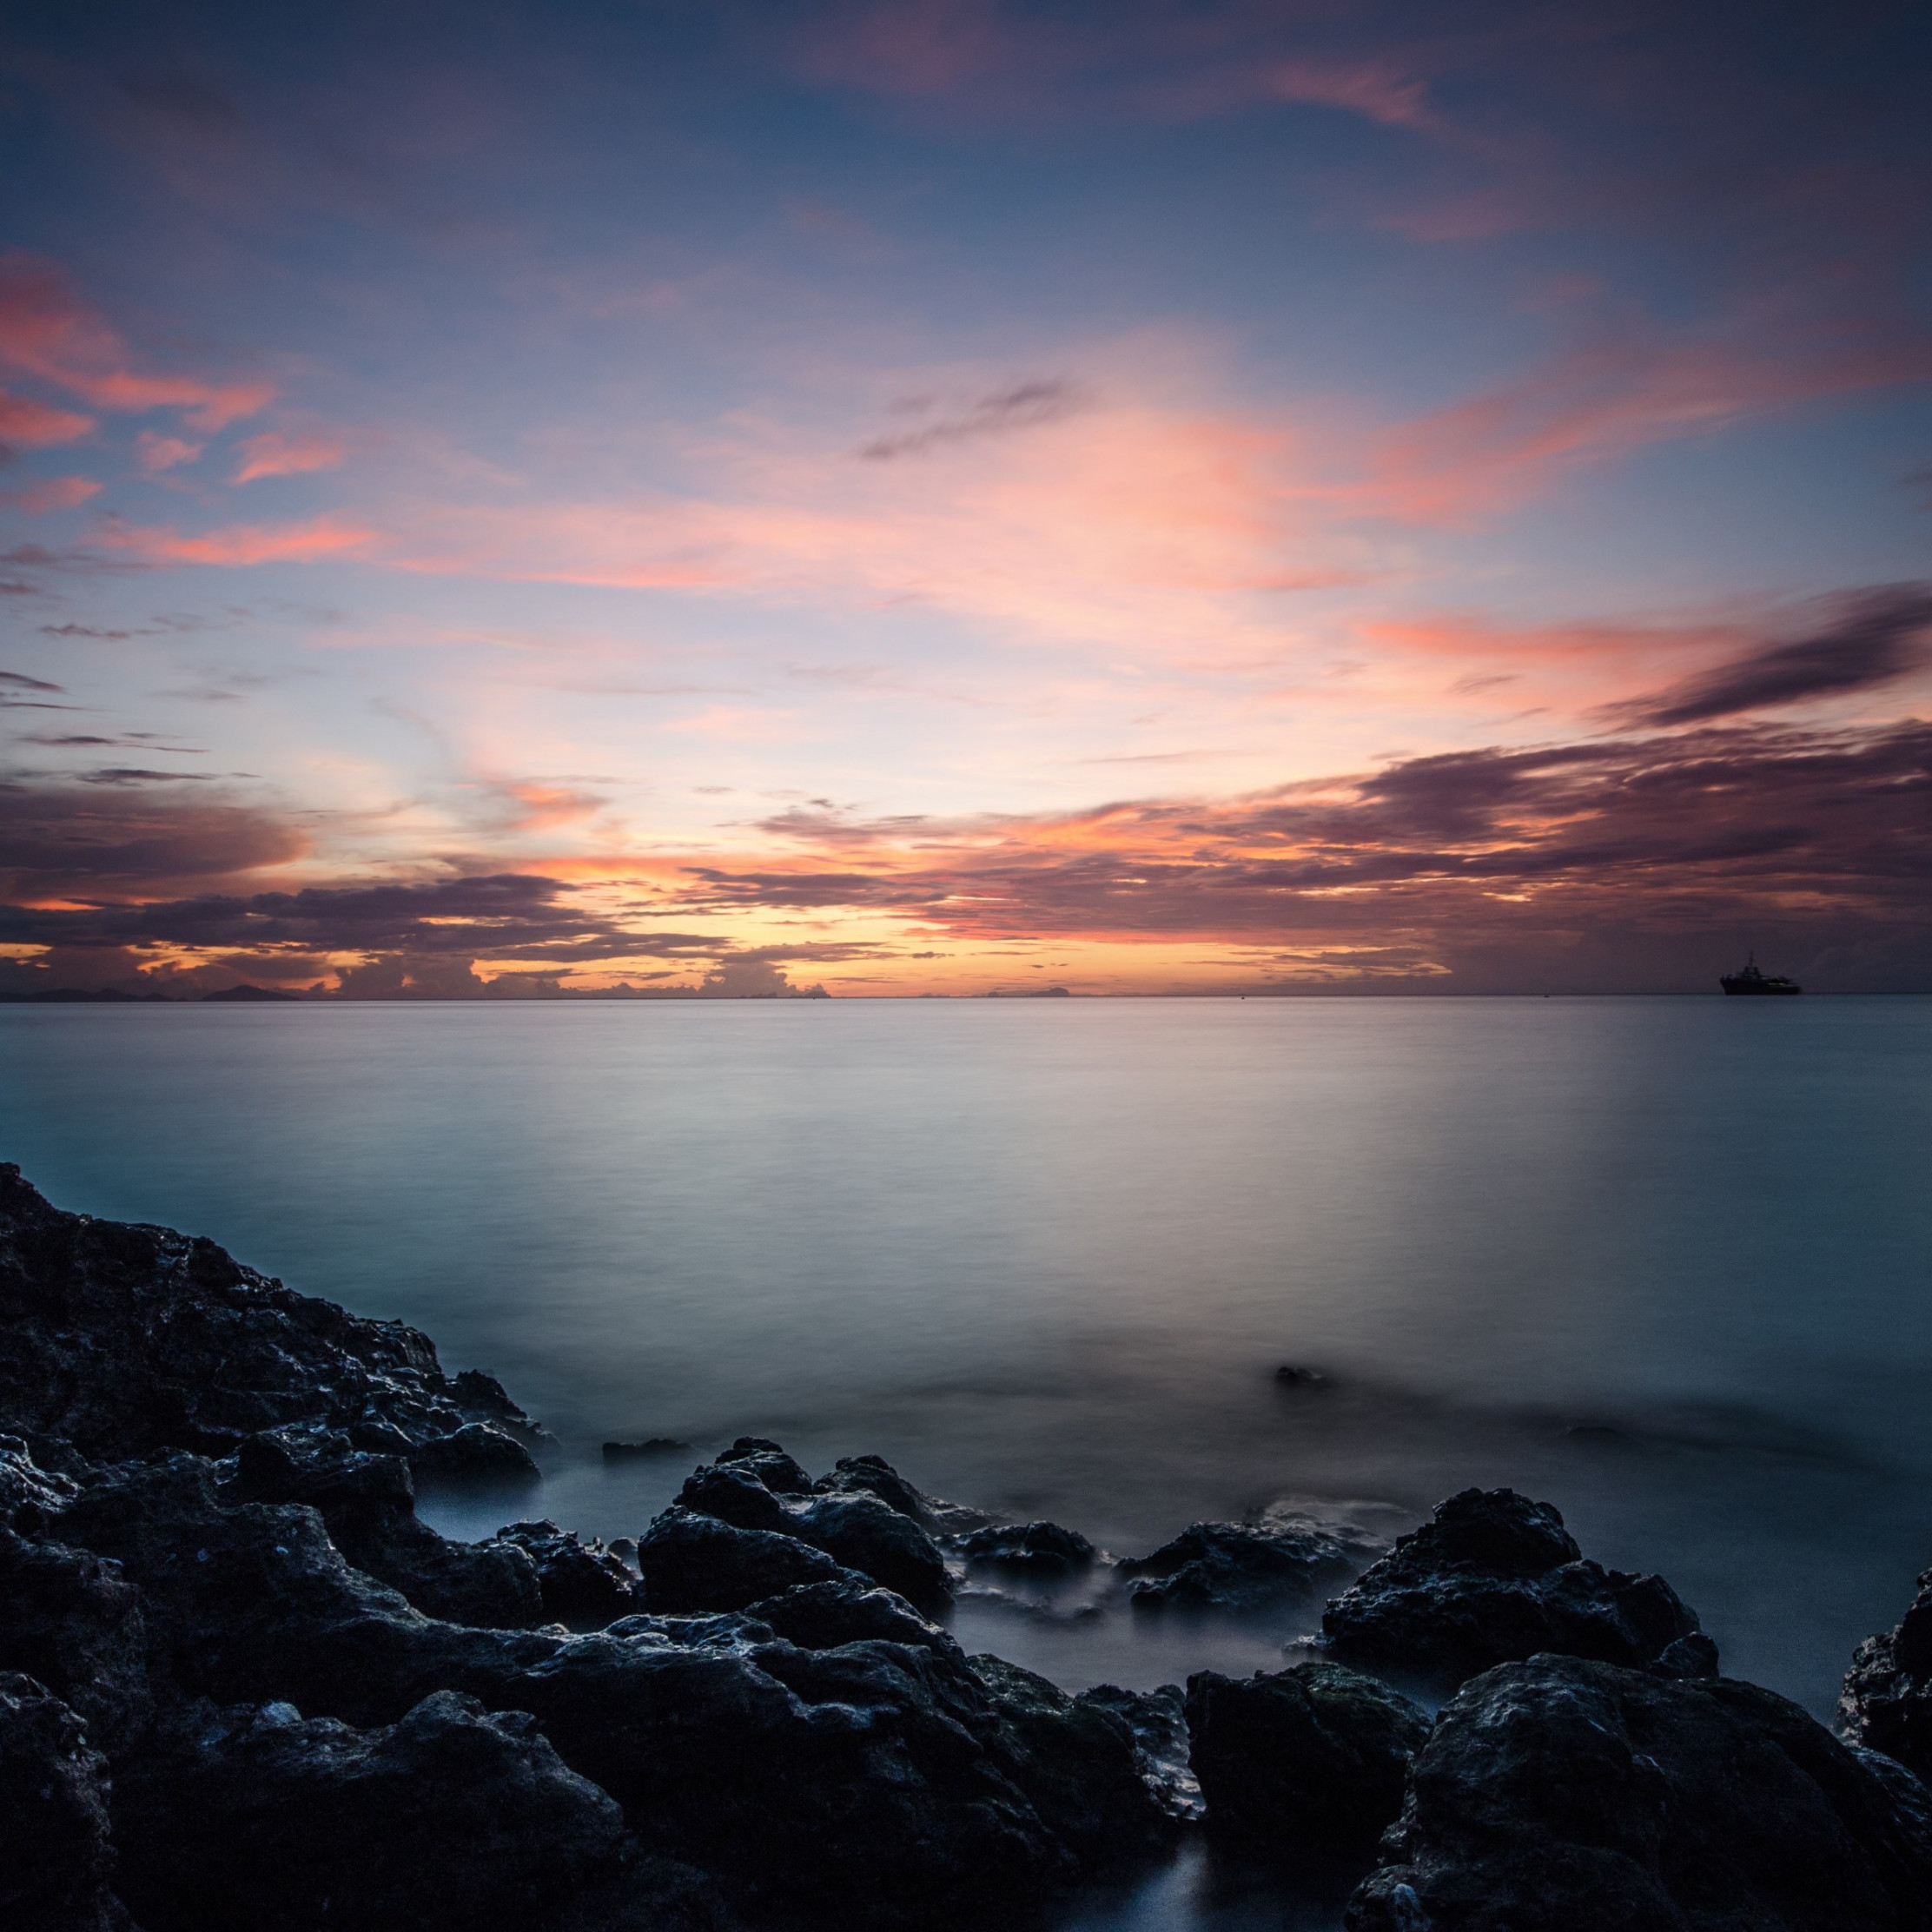 Sunset, rocks, clouds, view from Thailand wallpaper 2224x2224